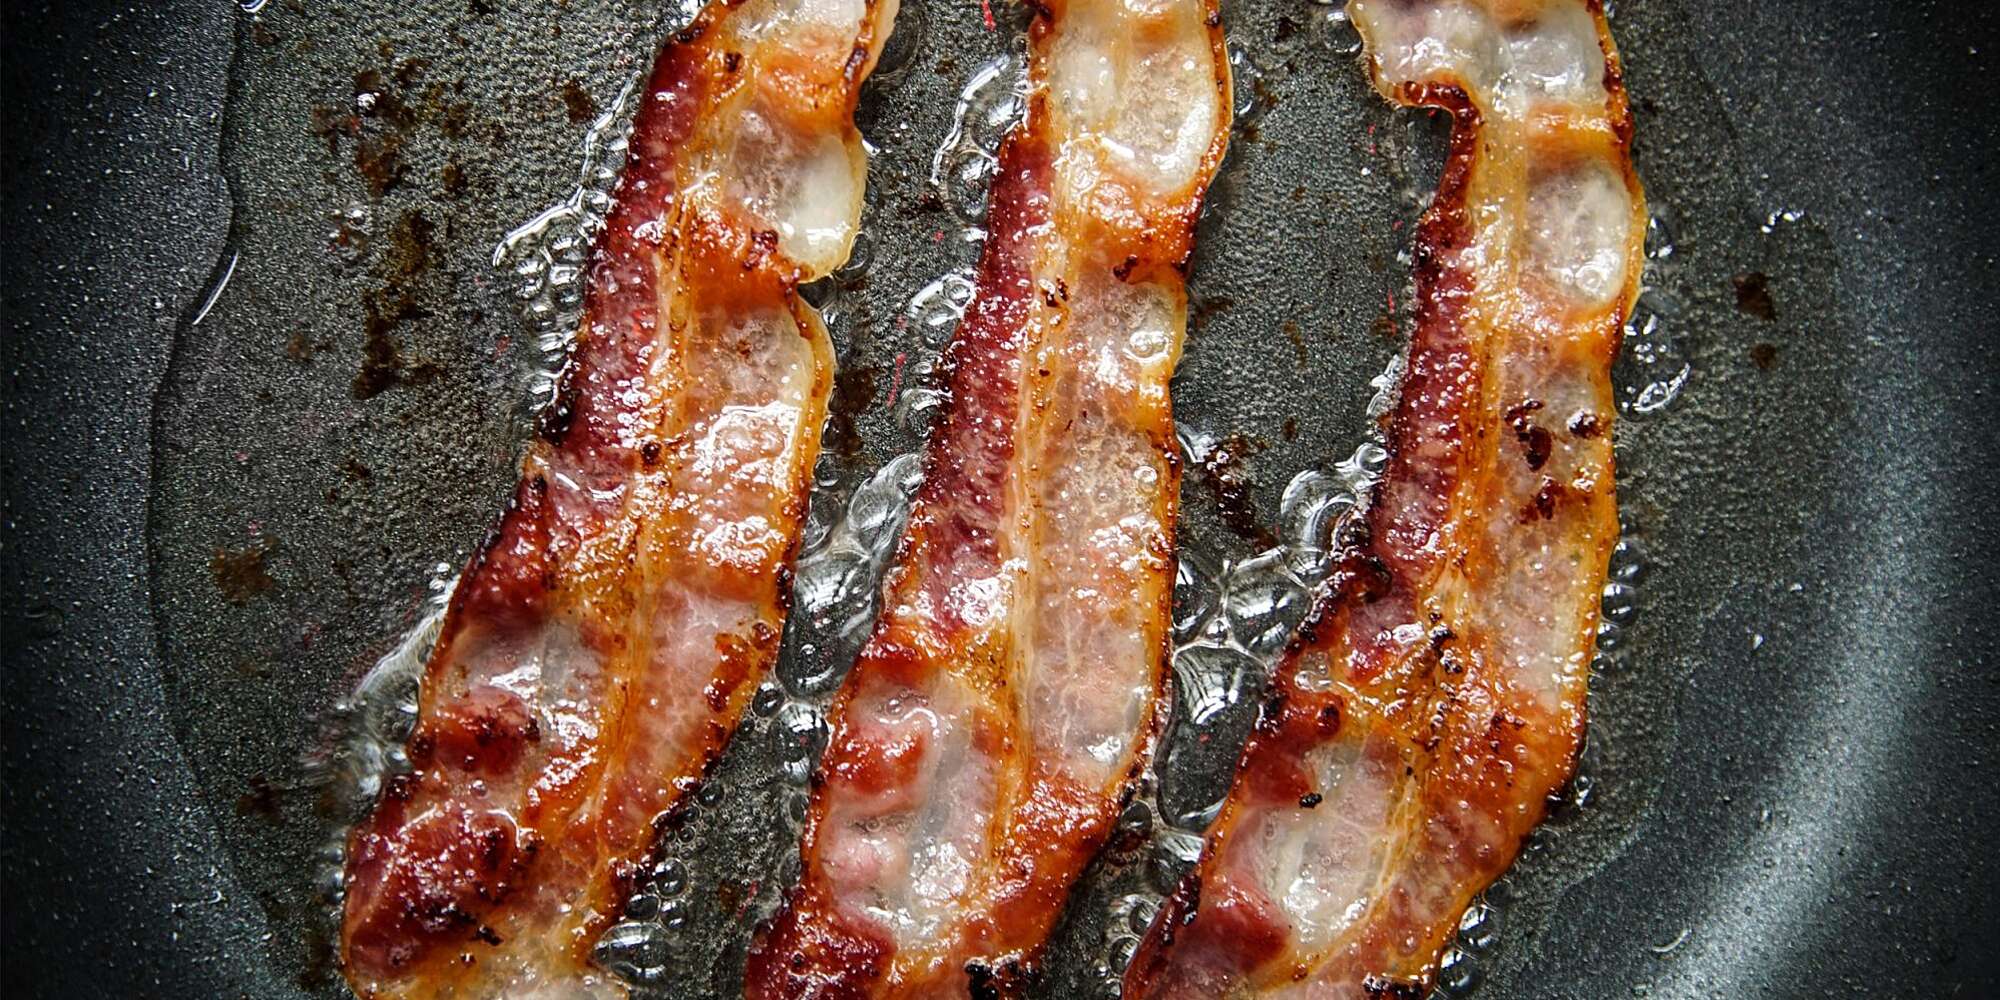 Is FryAway the answer to pesky leftover bacon grease? - CNET